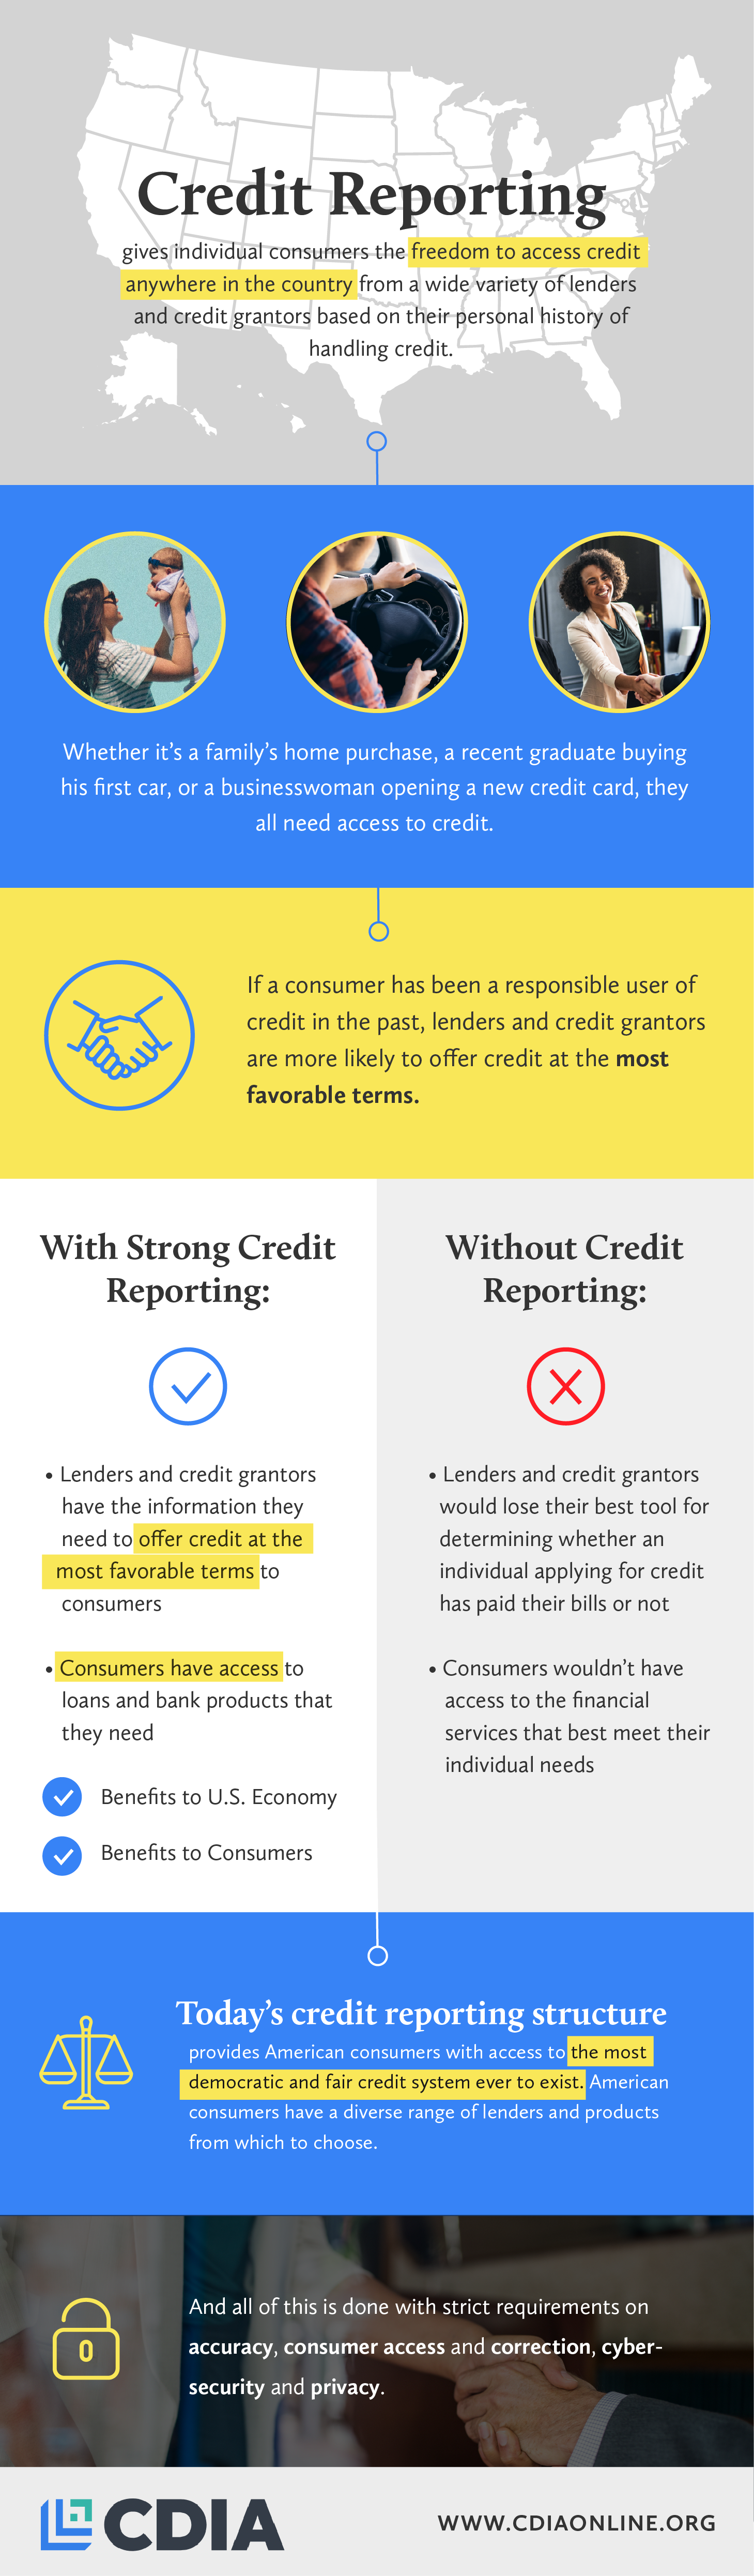 Credit Reporting Overview CDIA